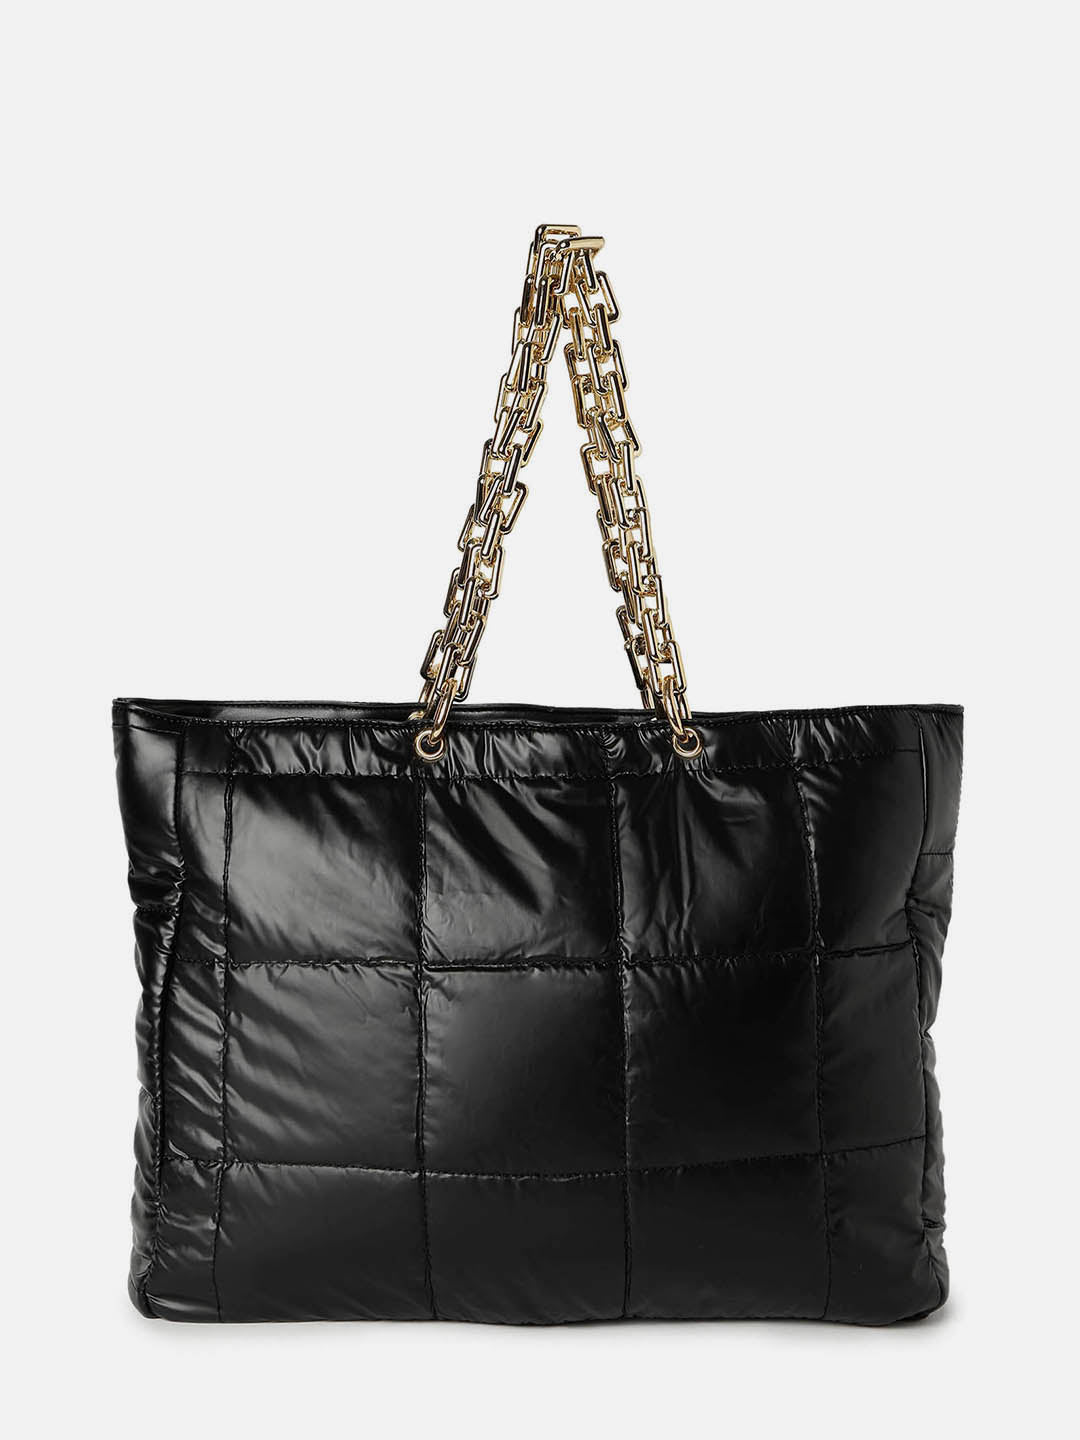 Masquerade Quilted Black Tote Bag